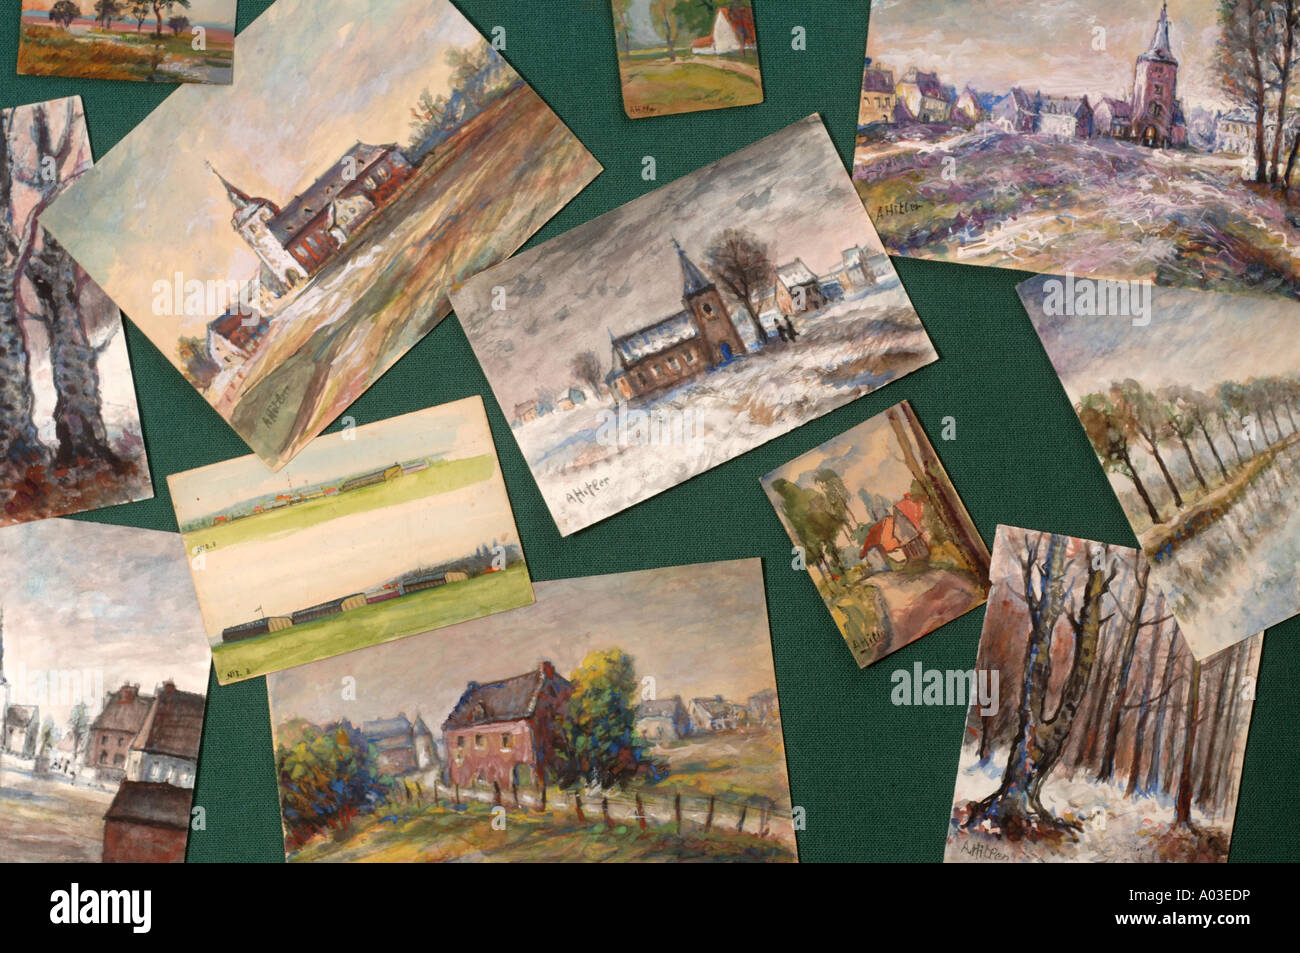 A SELECTION OF OIL PAINTINGS 1914 1918 PURPORTED TO BE BY ADOLF HITLER Stock Photo